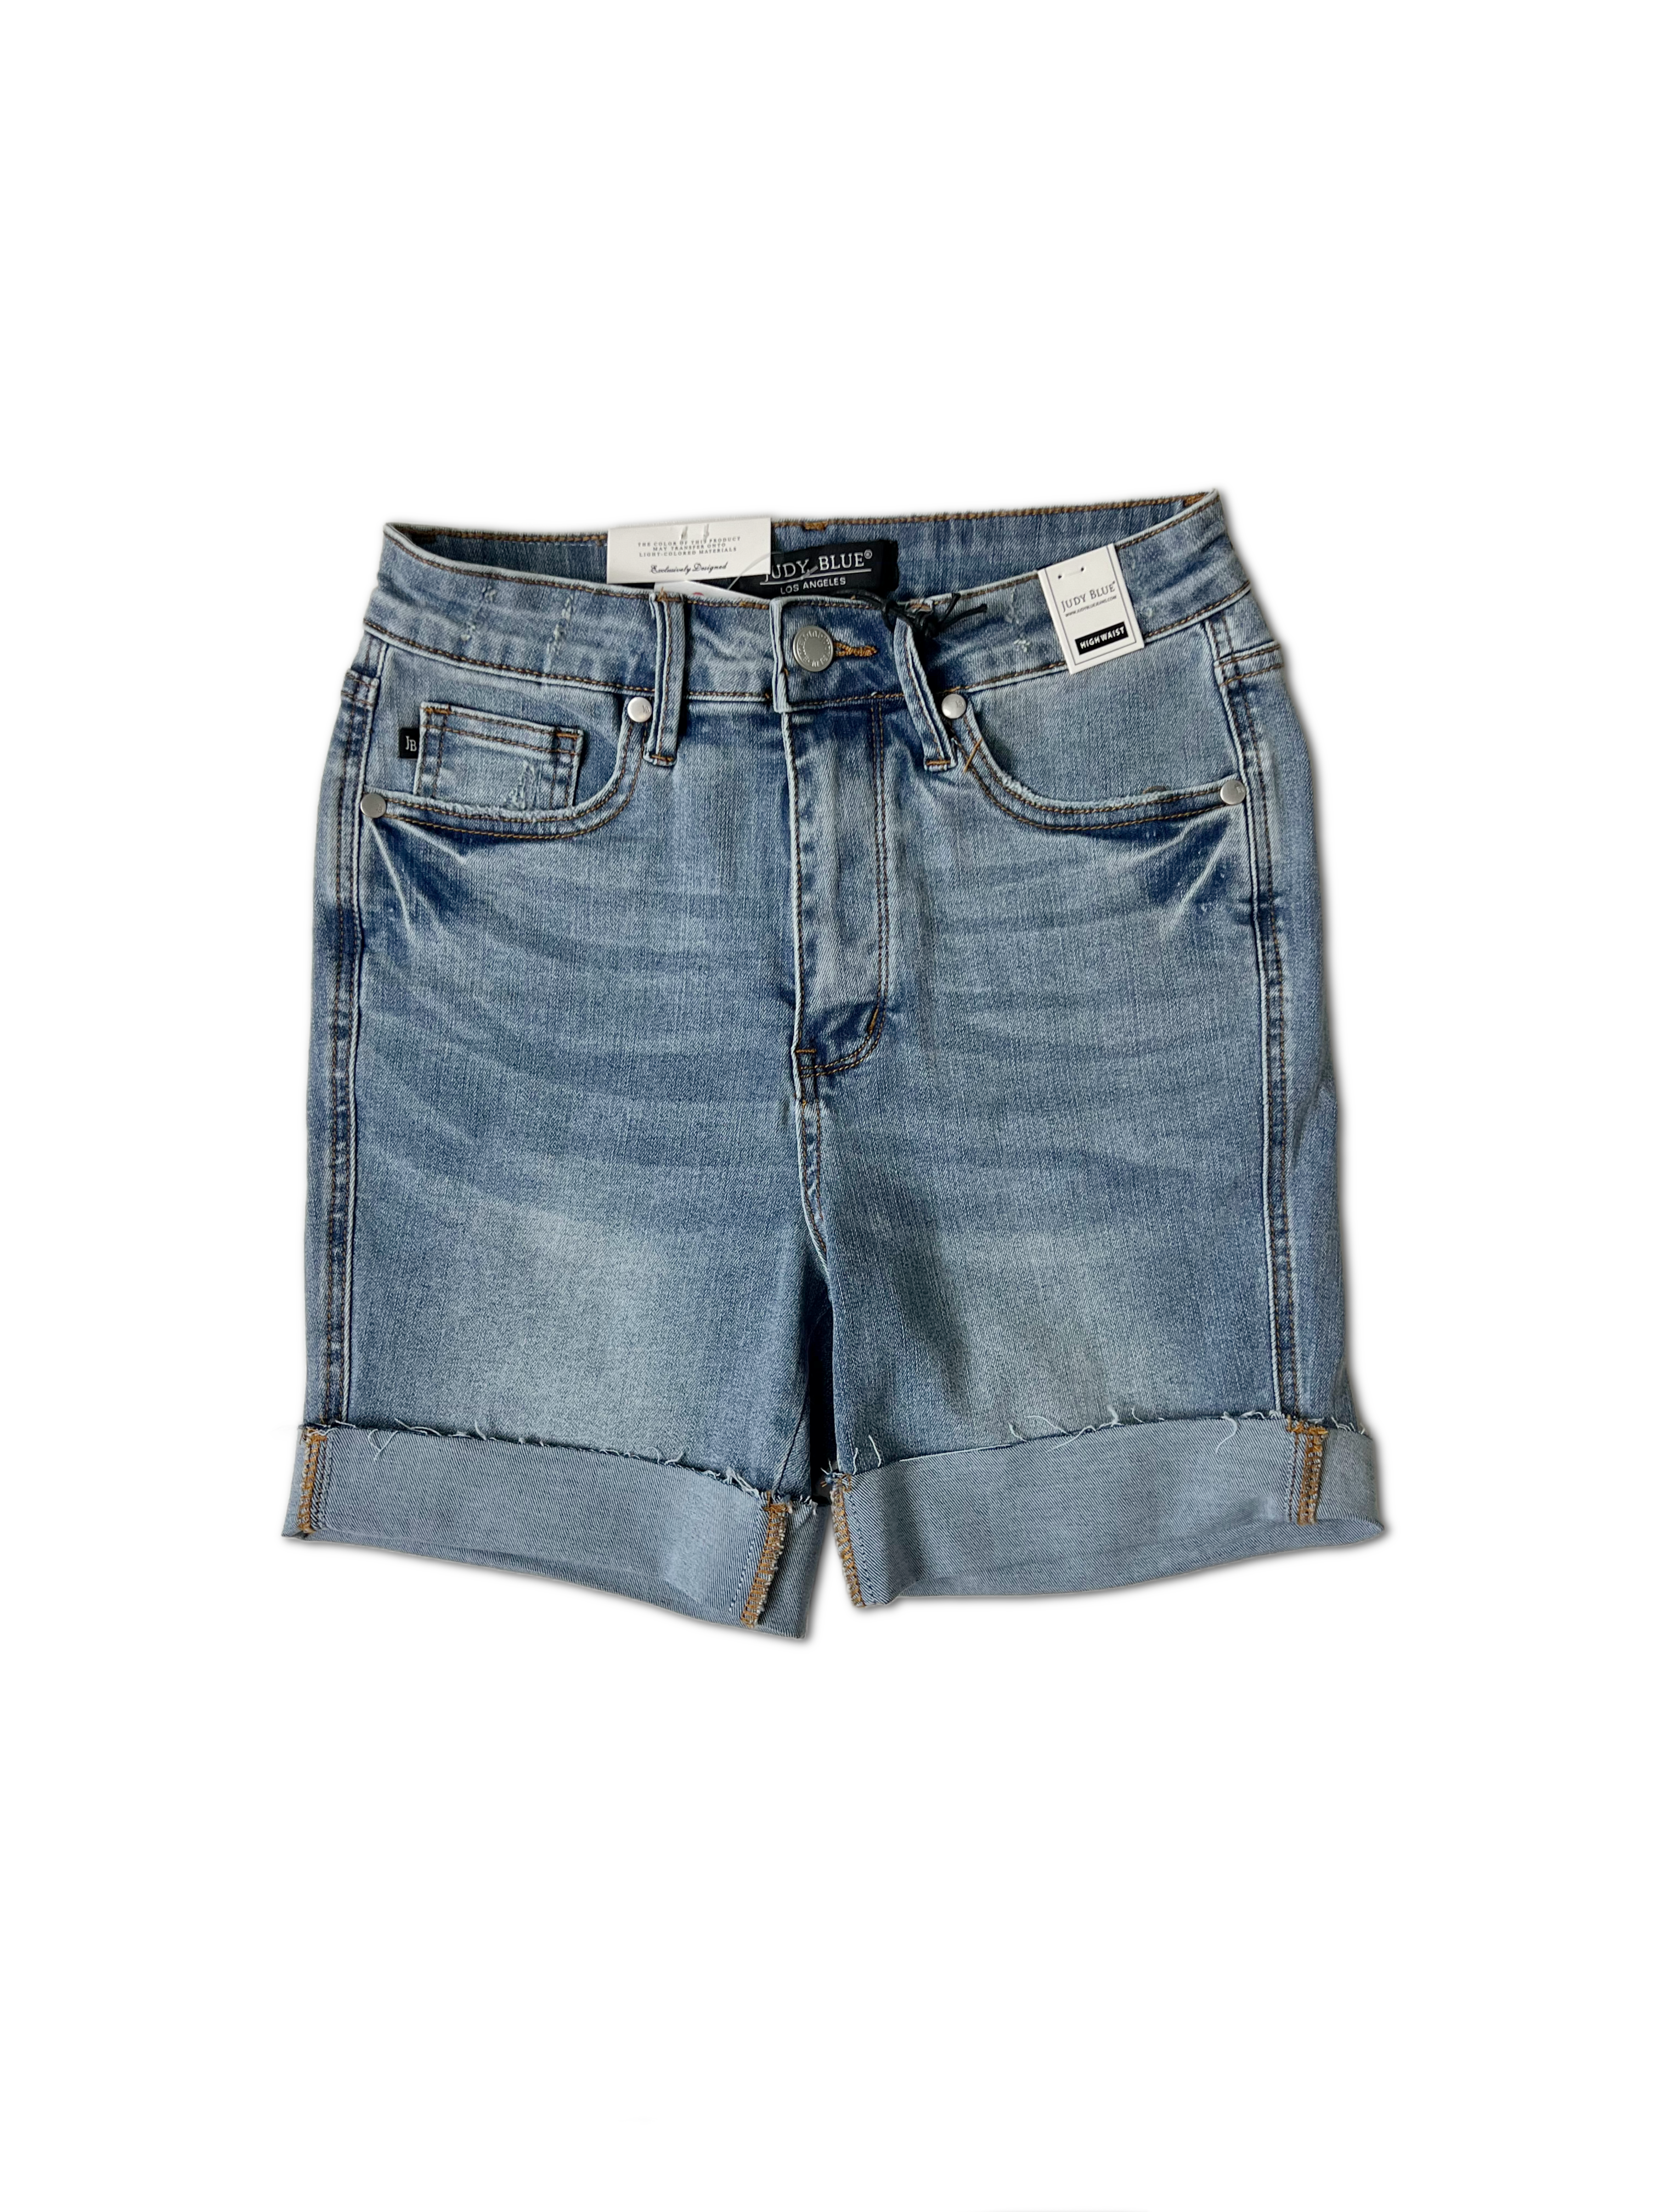 Best of Both Worlds - Judy Blue Shorts  JB Boutique Simplified   